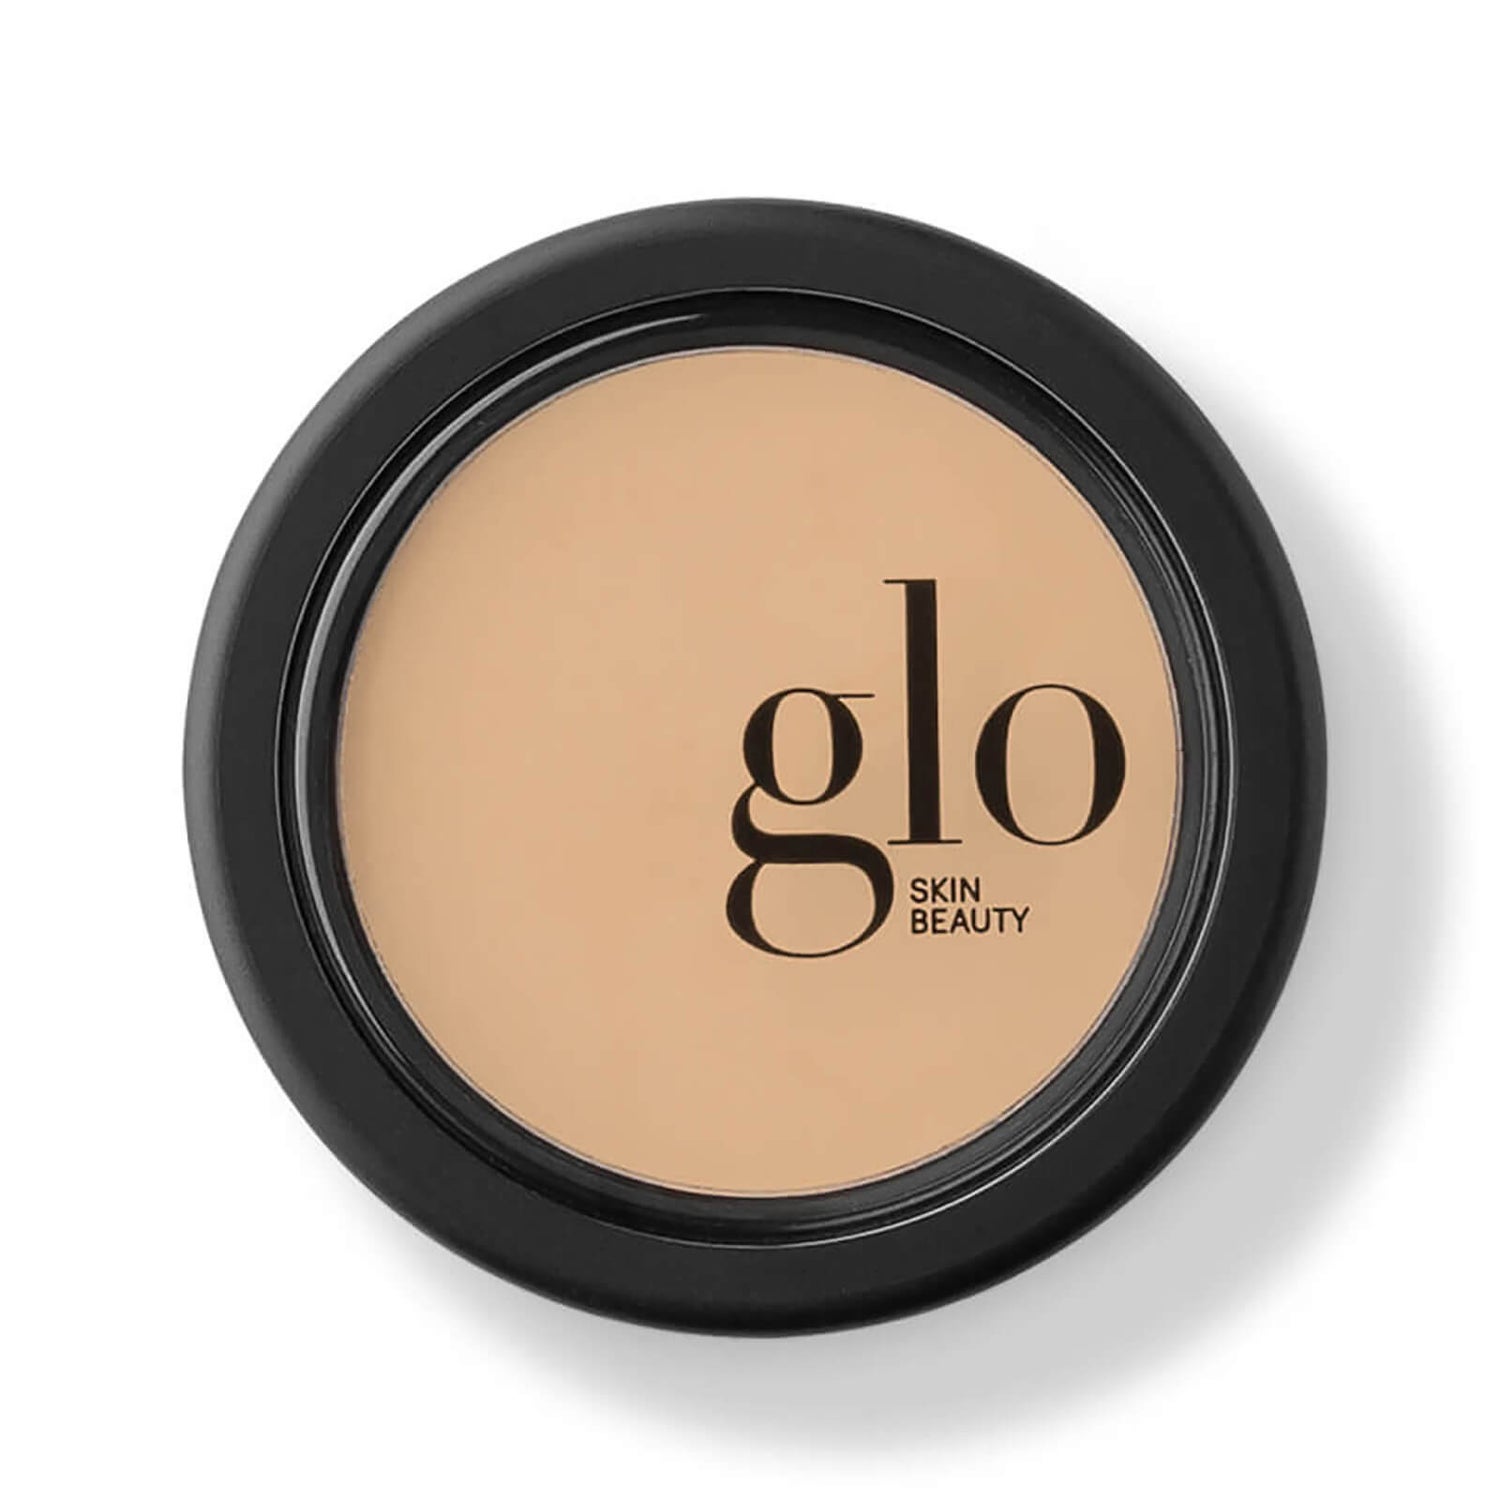 Glo Skin Beauty Oil-Free Camouflage Concealer (0.11 oz.)